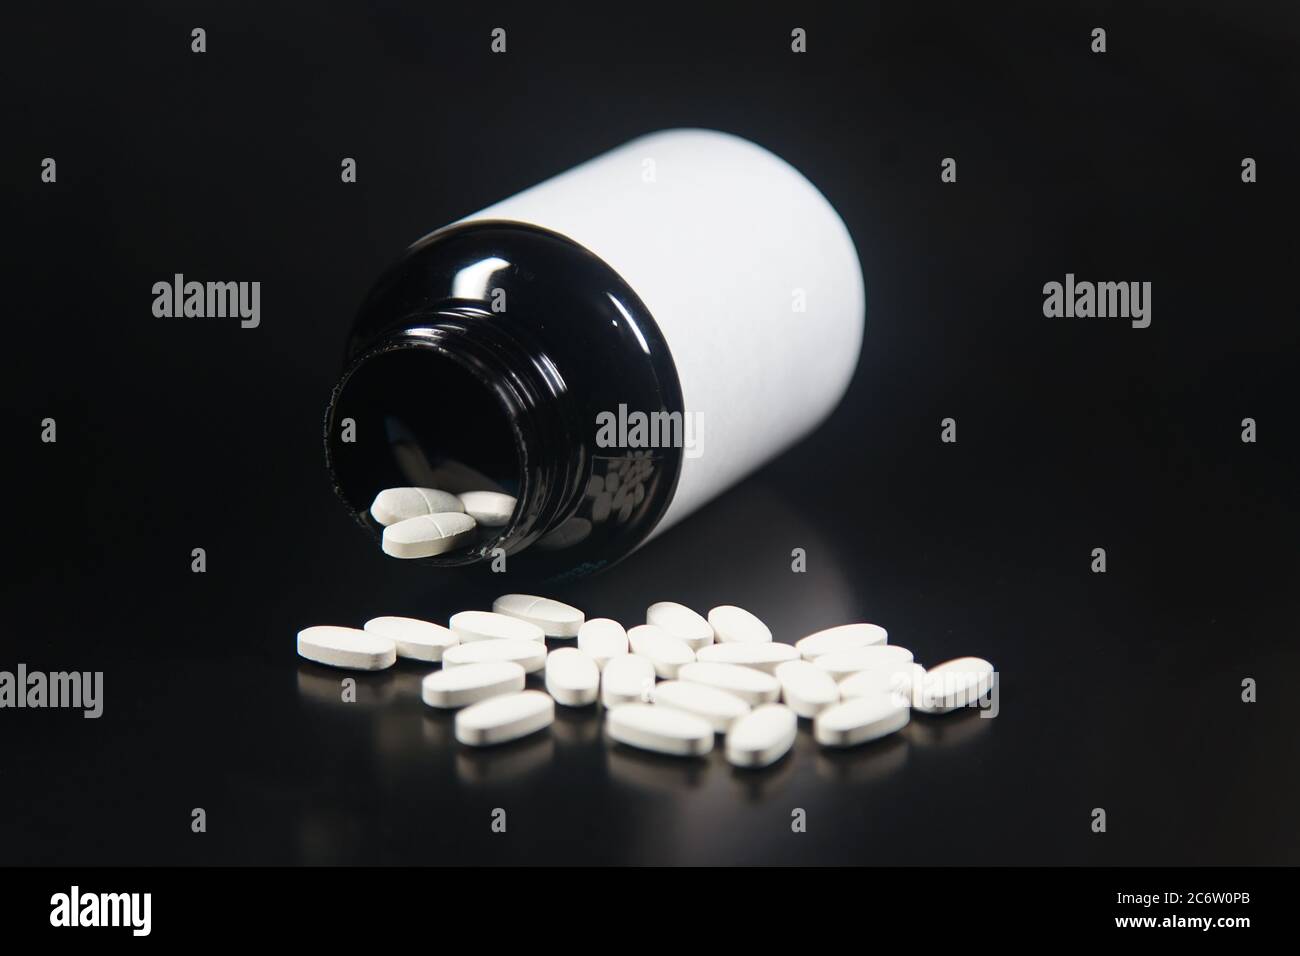 white medicine tablets with black bottle Stock Photo